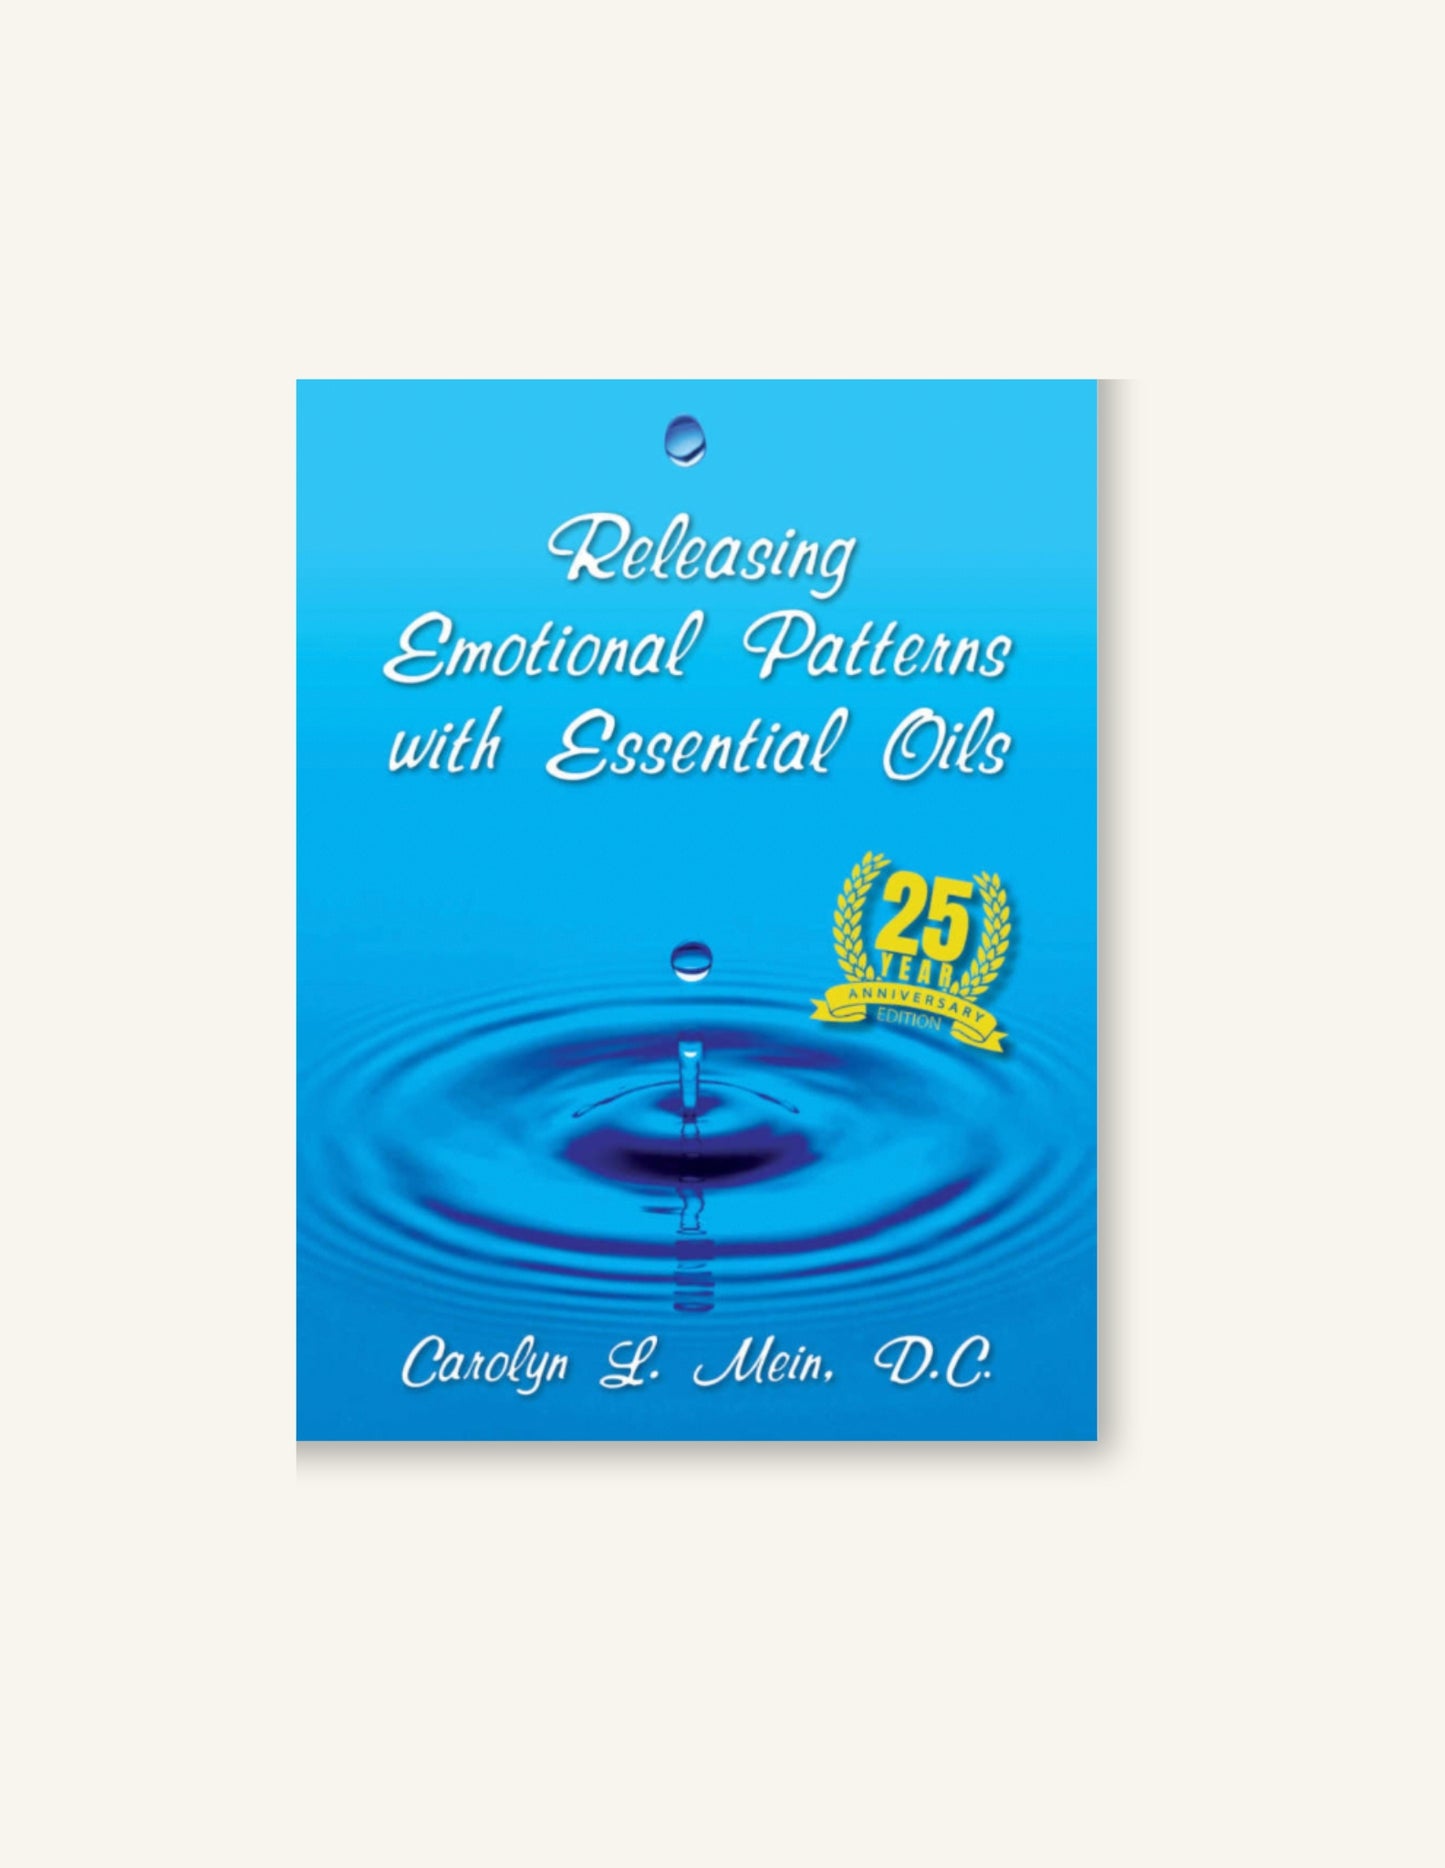 Releasing Emotional Patterns with Essential Oils, Carolyn L. Mein, D.C.